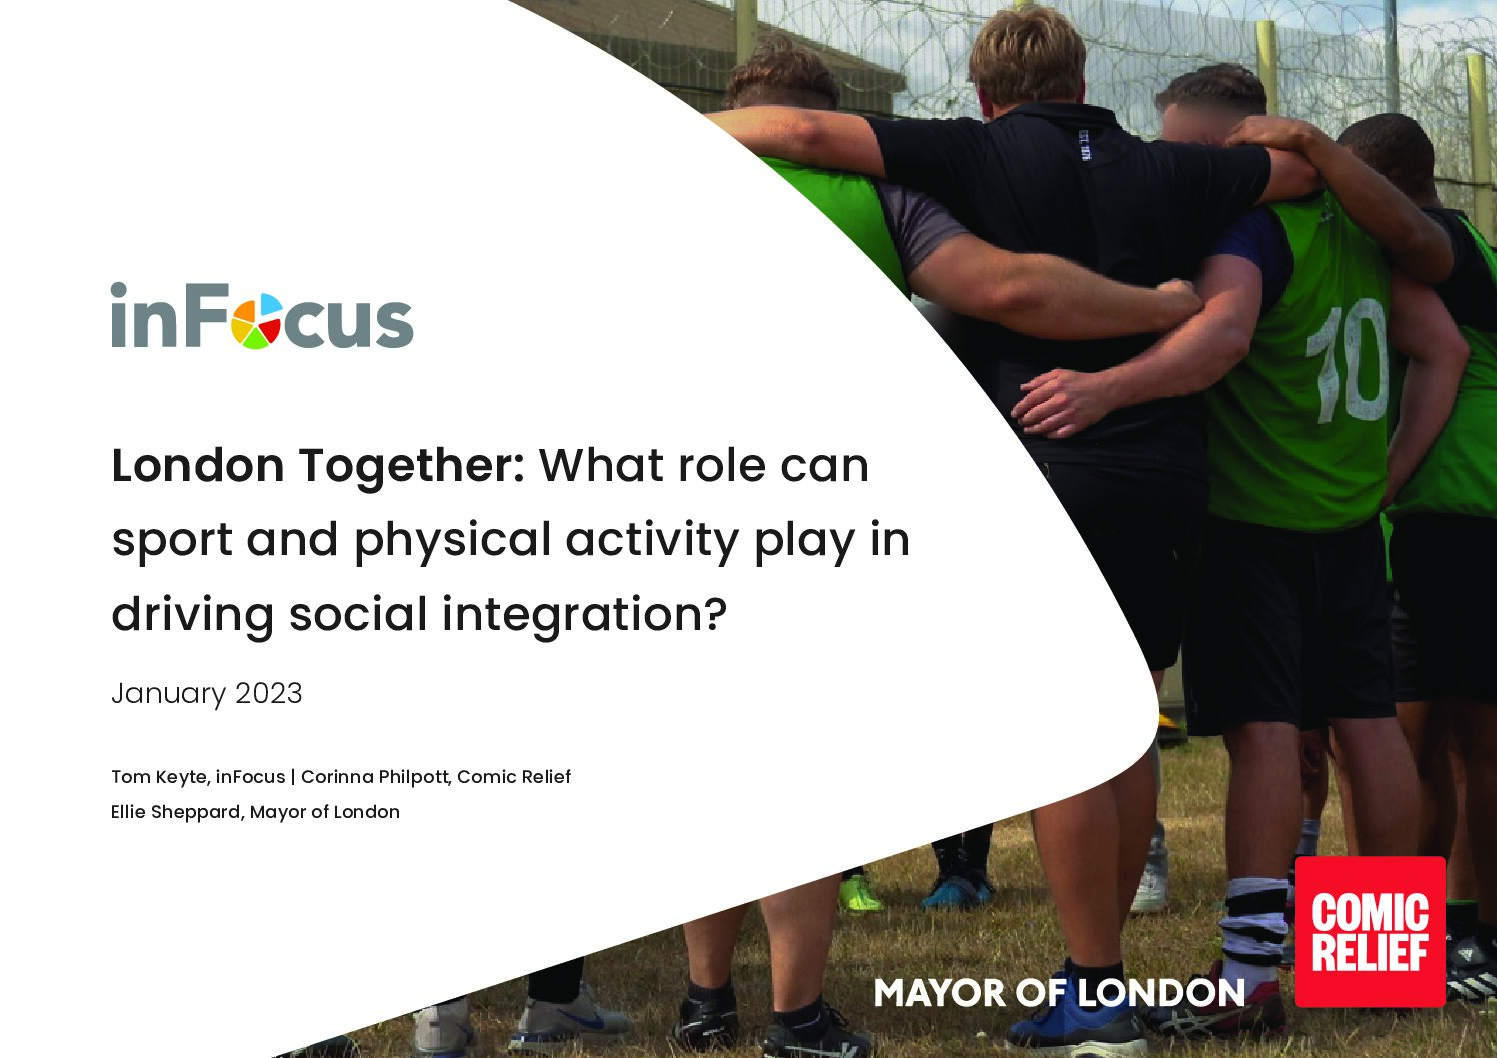 London Together: What role can sport and physical activity play in driving social integration?